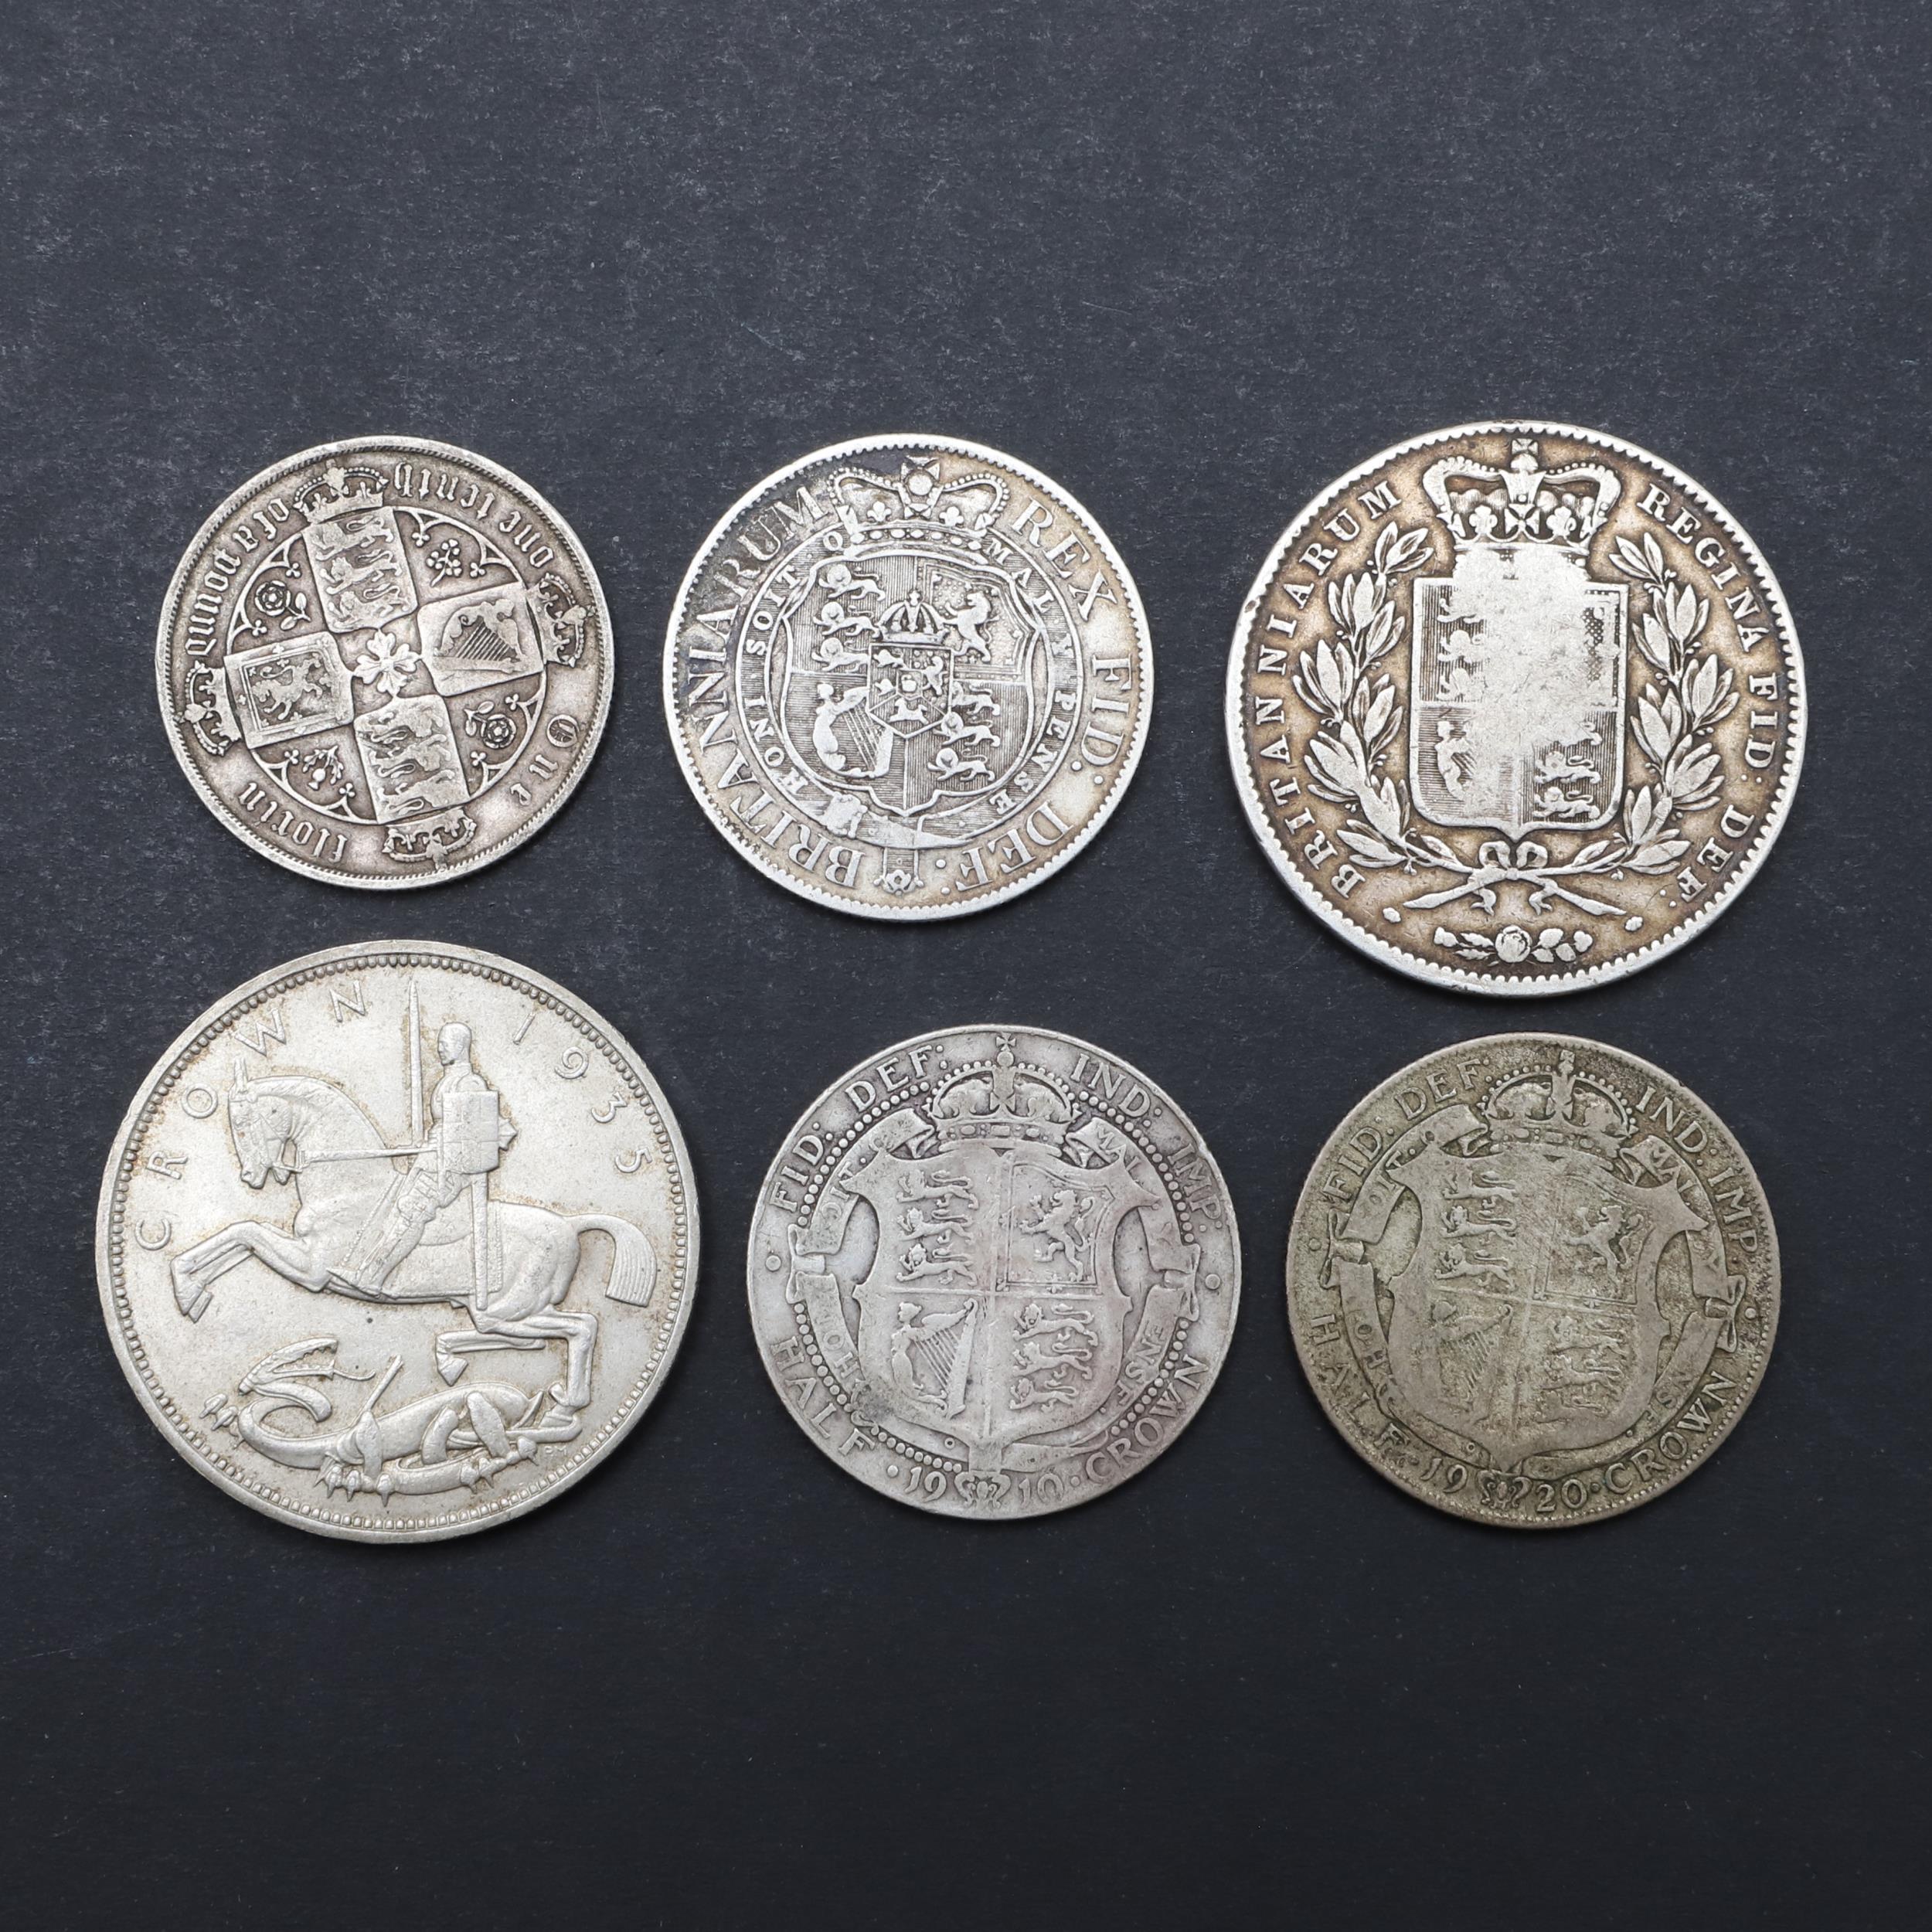 A GEORGE III HALF CROWN 1817, QUEEN VICTORIA CROWN, 1845 AND OTHERS. - Image 2 of 3